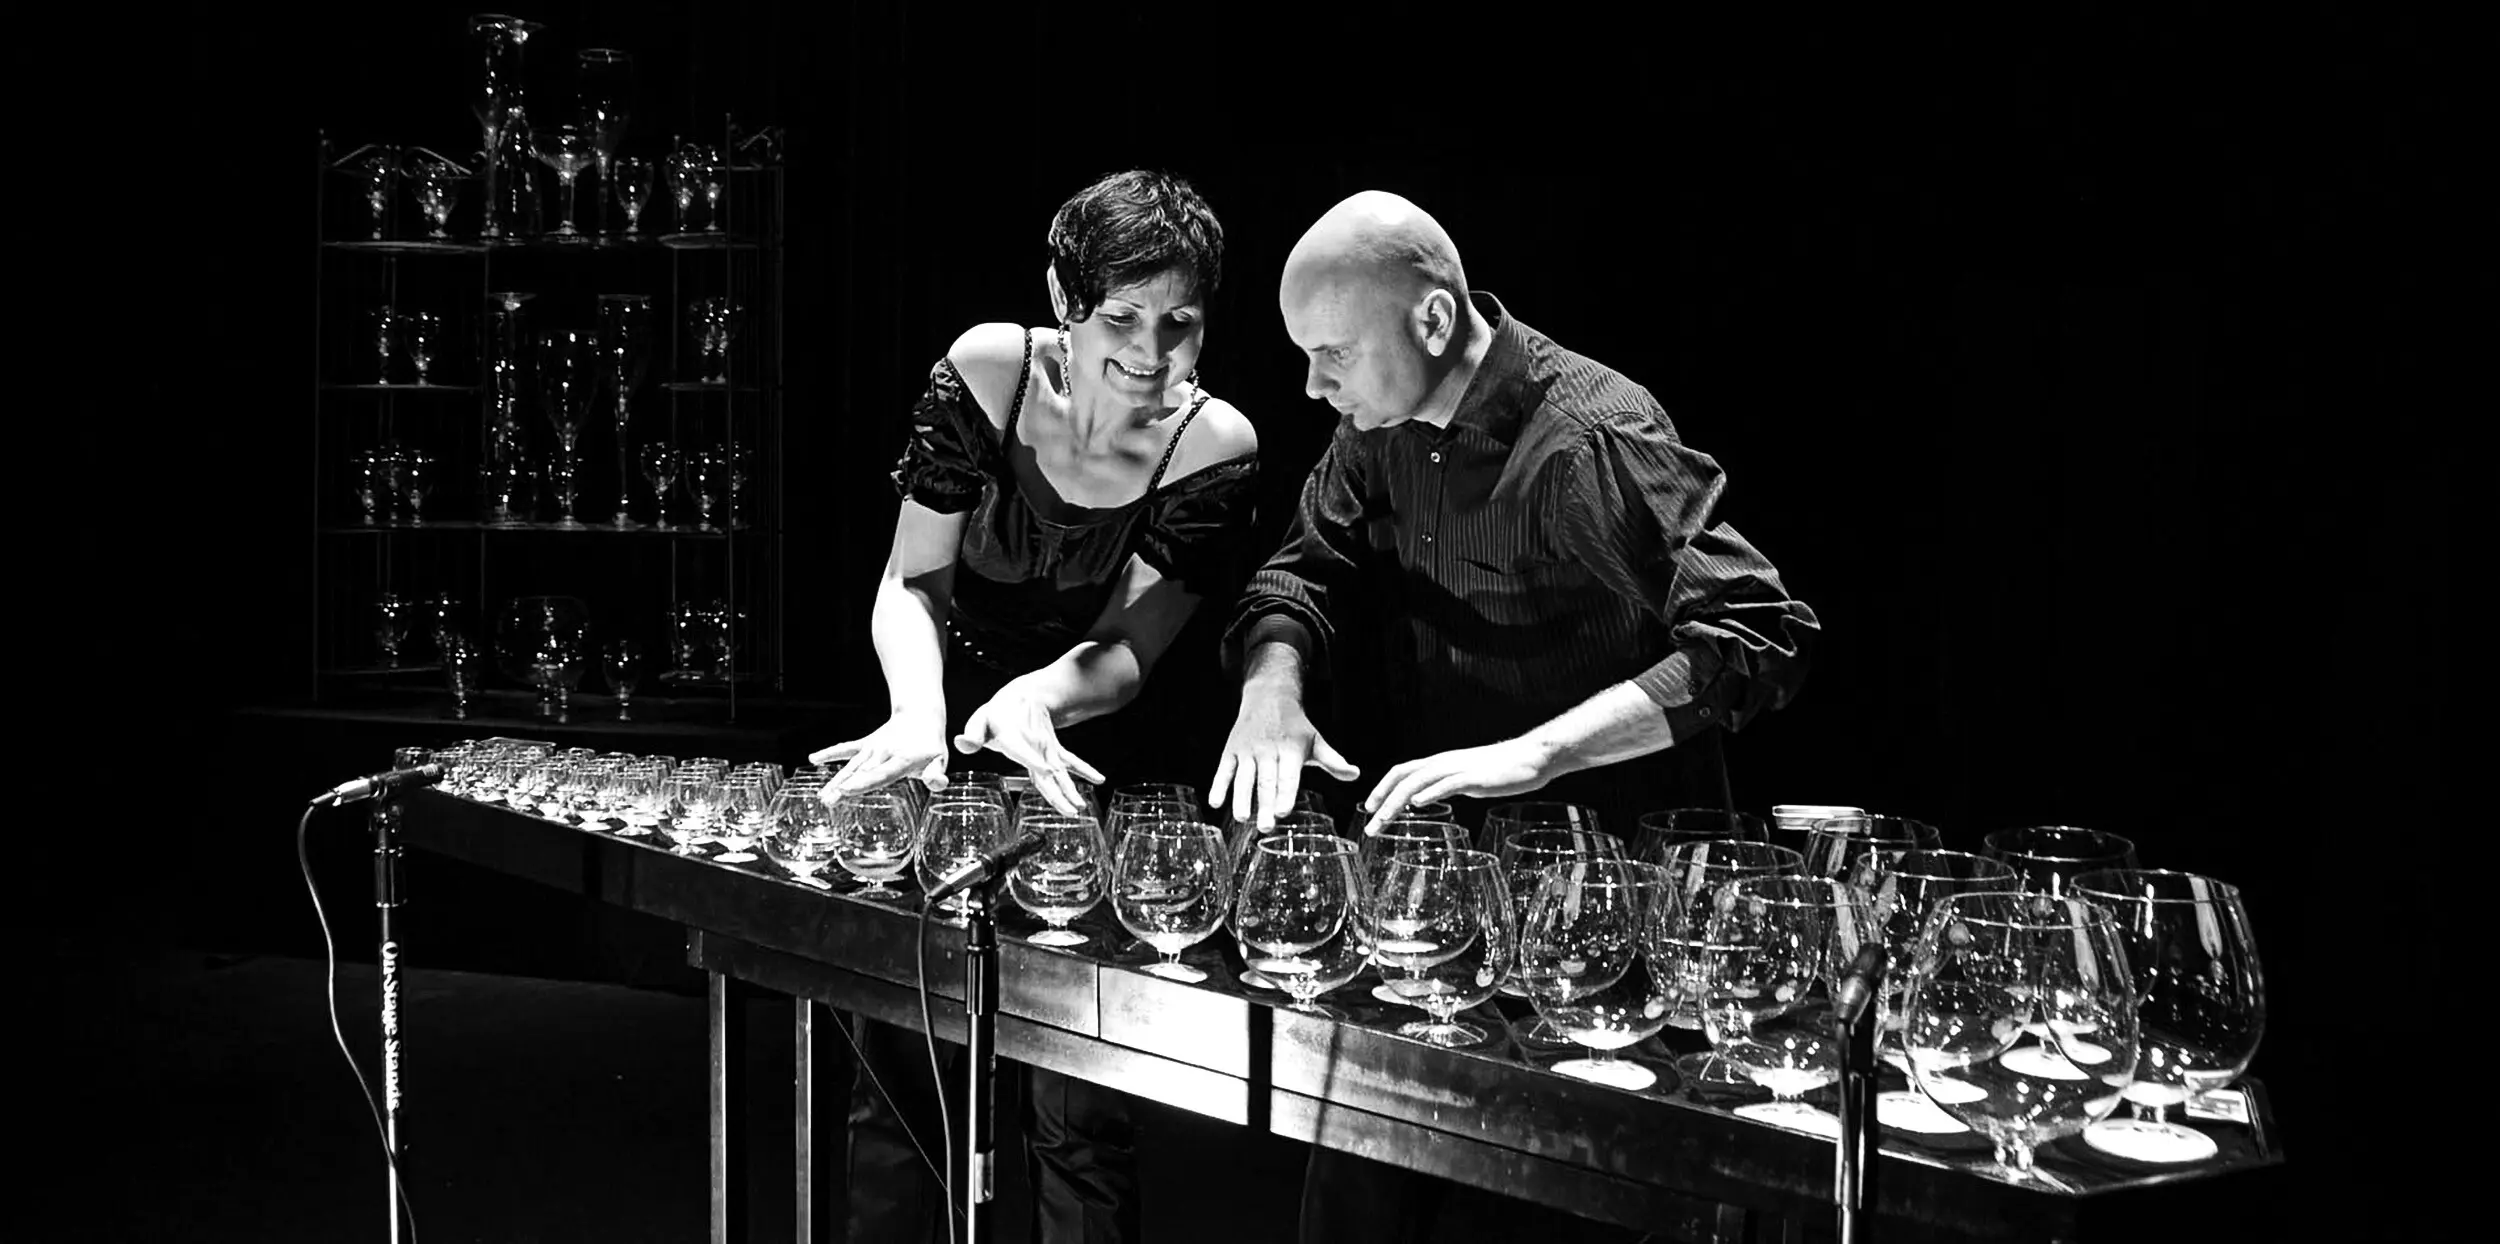 A glass harp is an enchanting instrument that uses a series of glass bowls or goblets, tuned by adding or subtracting water, to produce captivating melodies.